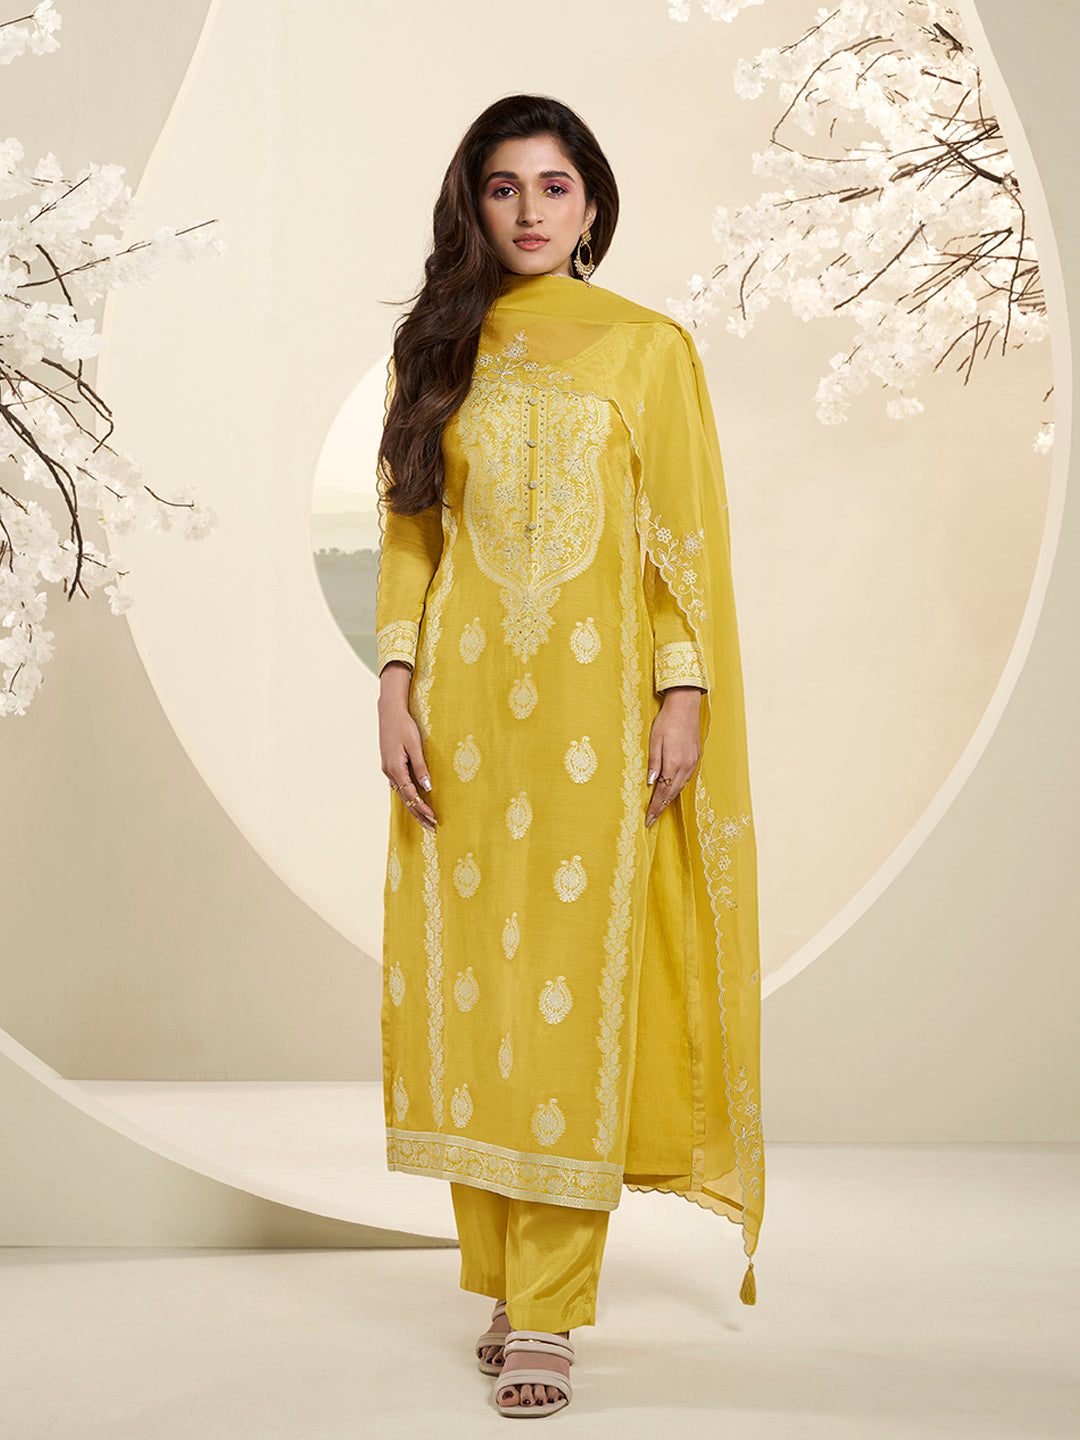 Yellow Muslin Jacquard Kurta Suit Set with HandCrafted Buttons Product vendor